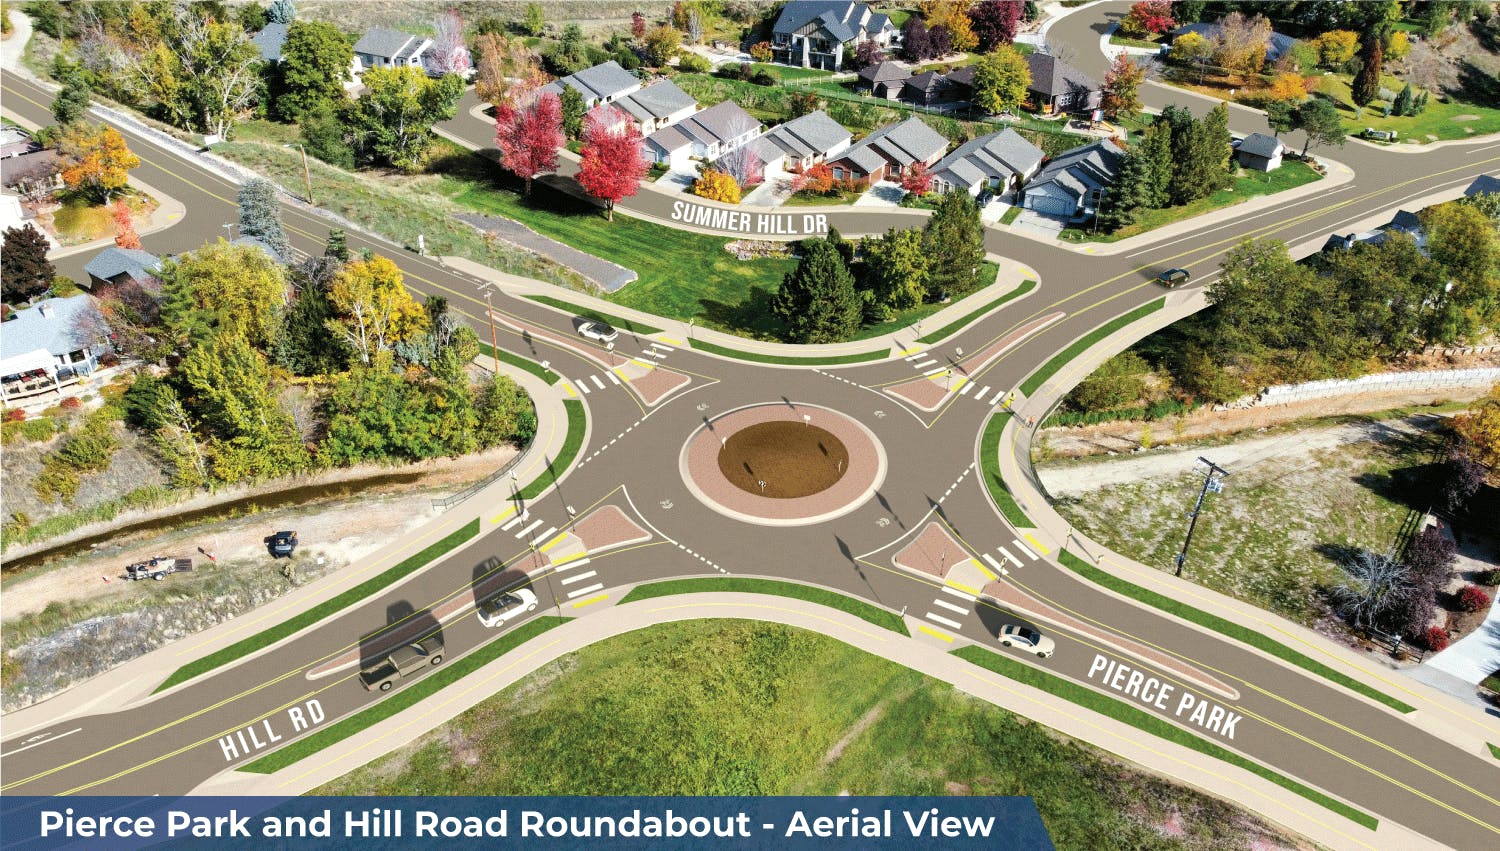 Pierce Park and Hill Road Roundabout - Aerial View